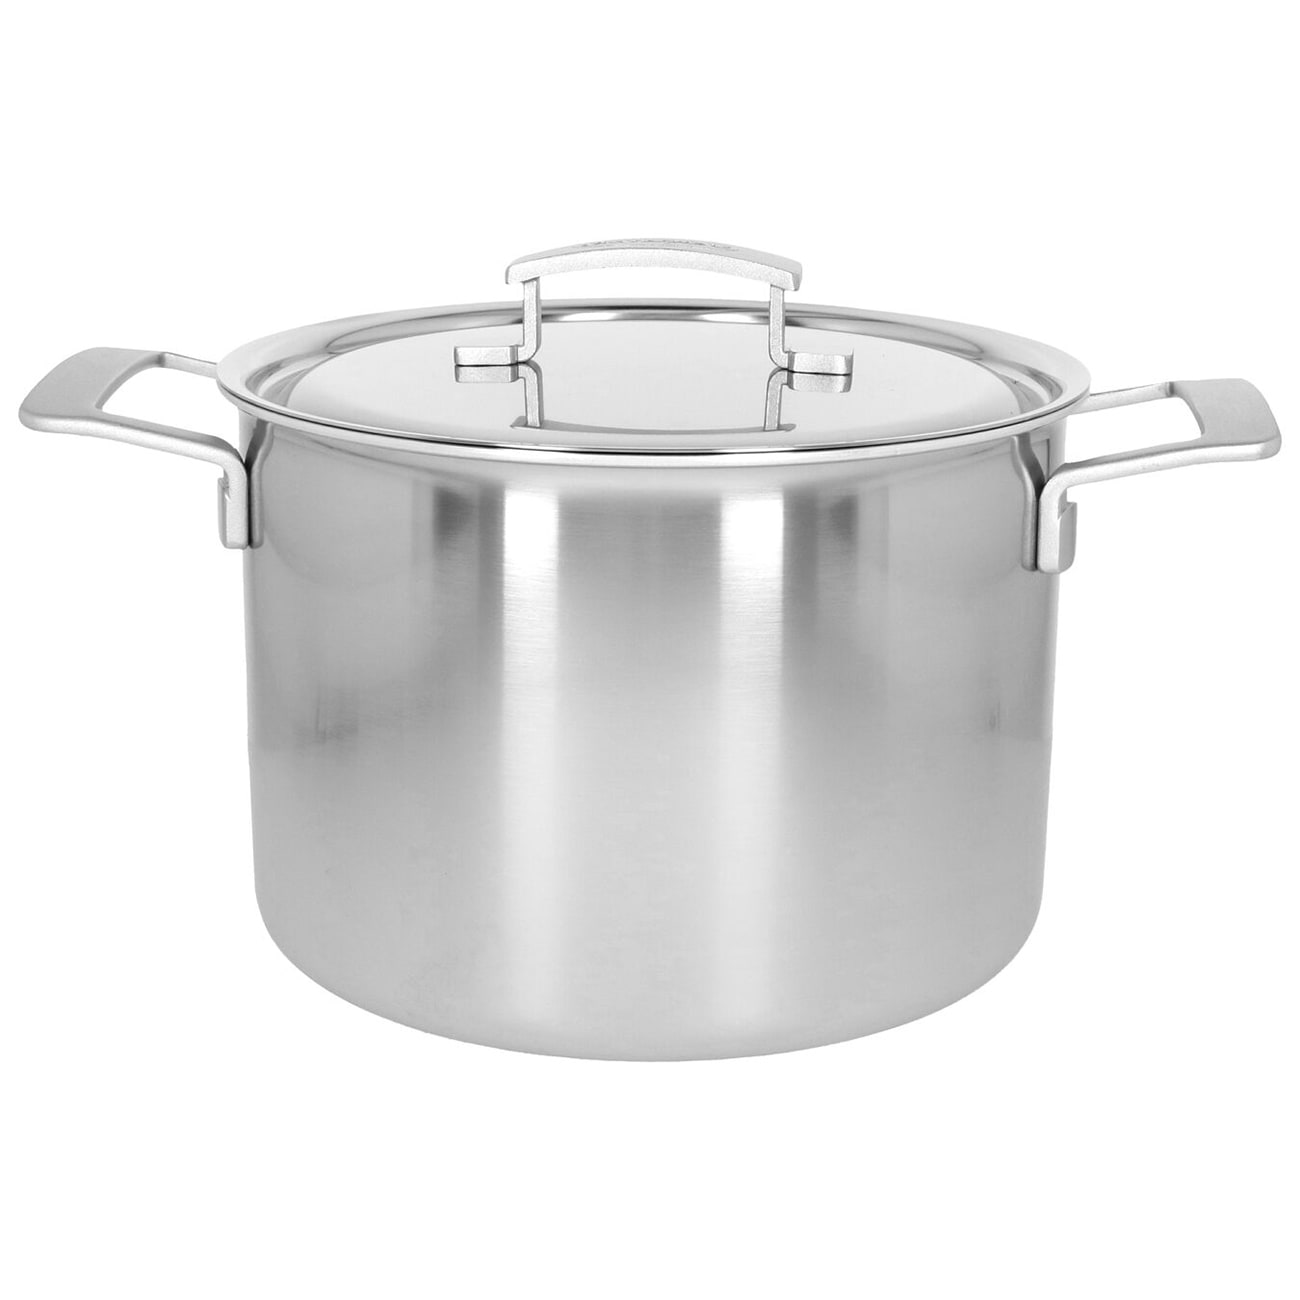 Browne 5723908 8 3/10 qt Stainless Steel Stock Pot - Induction Ready